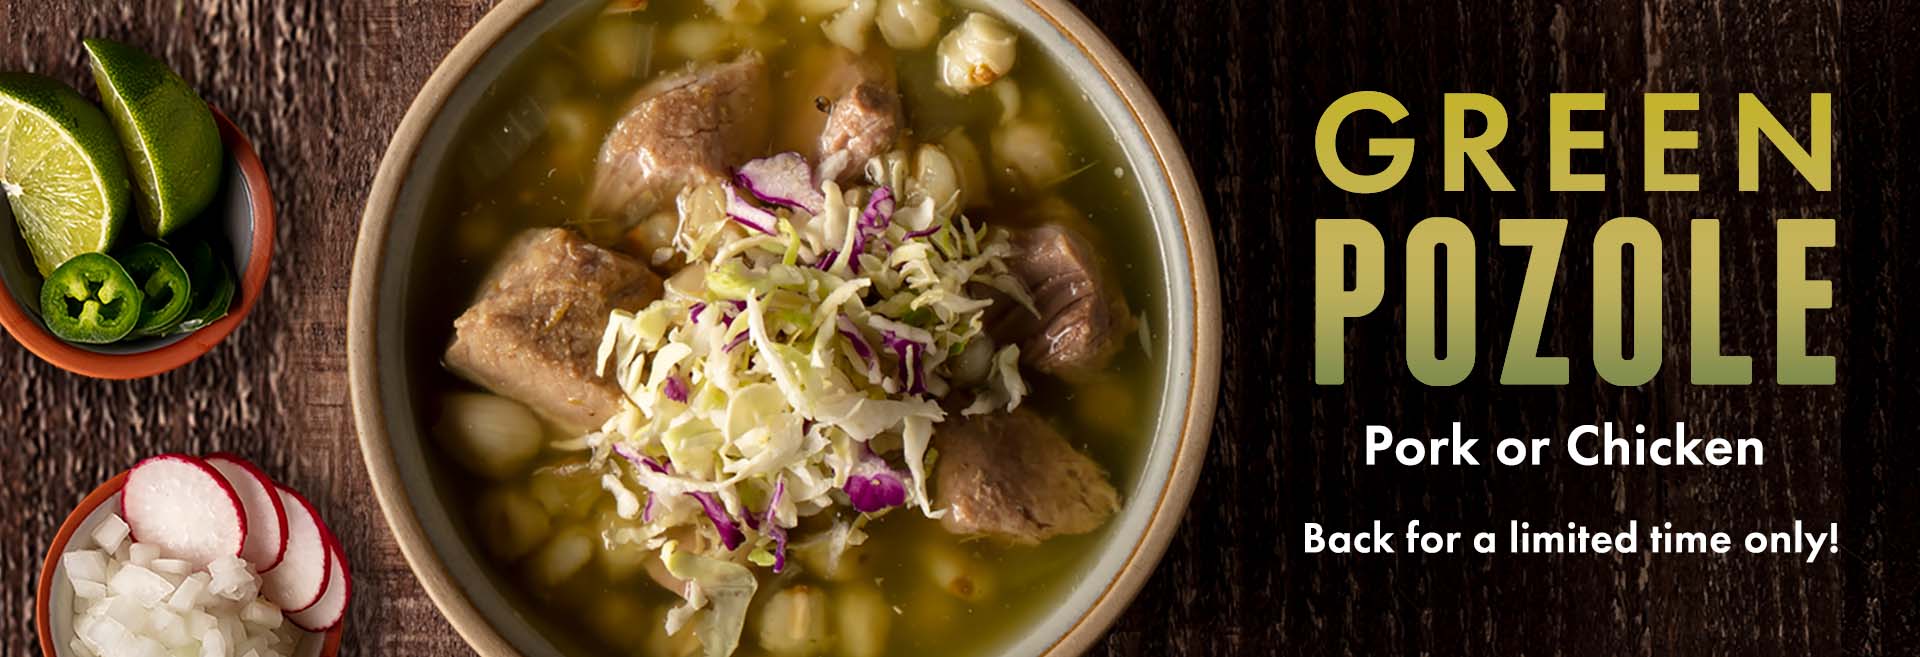 Pozole, Comfort Food You Crave, from Miguel's Restaurant